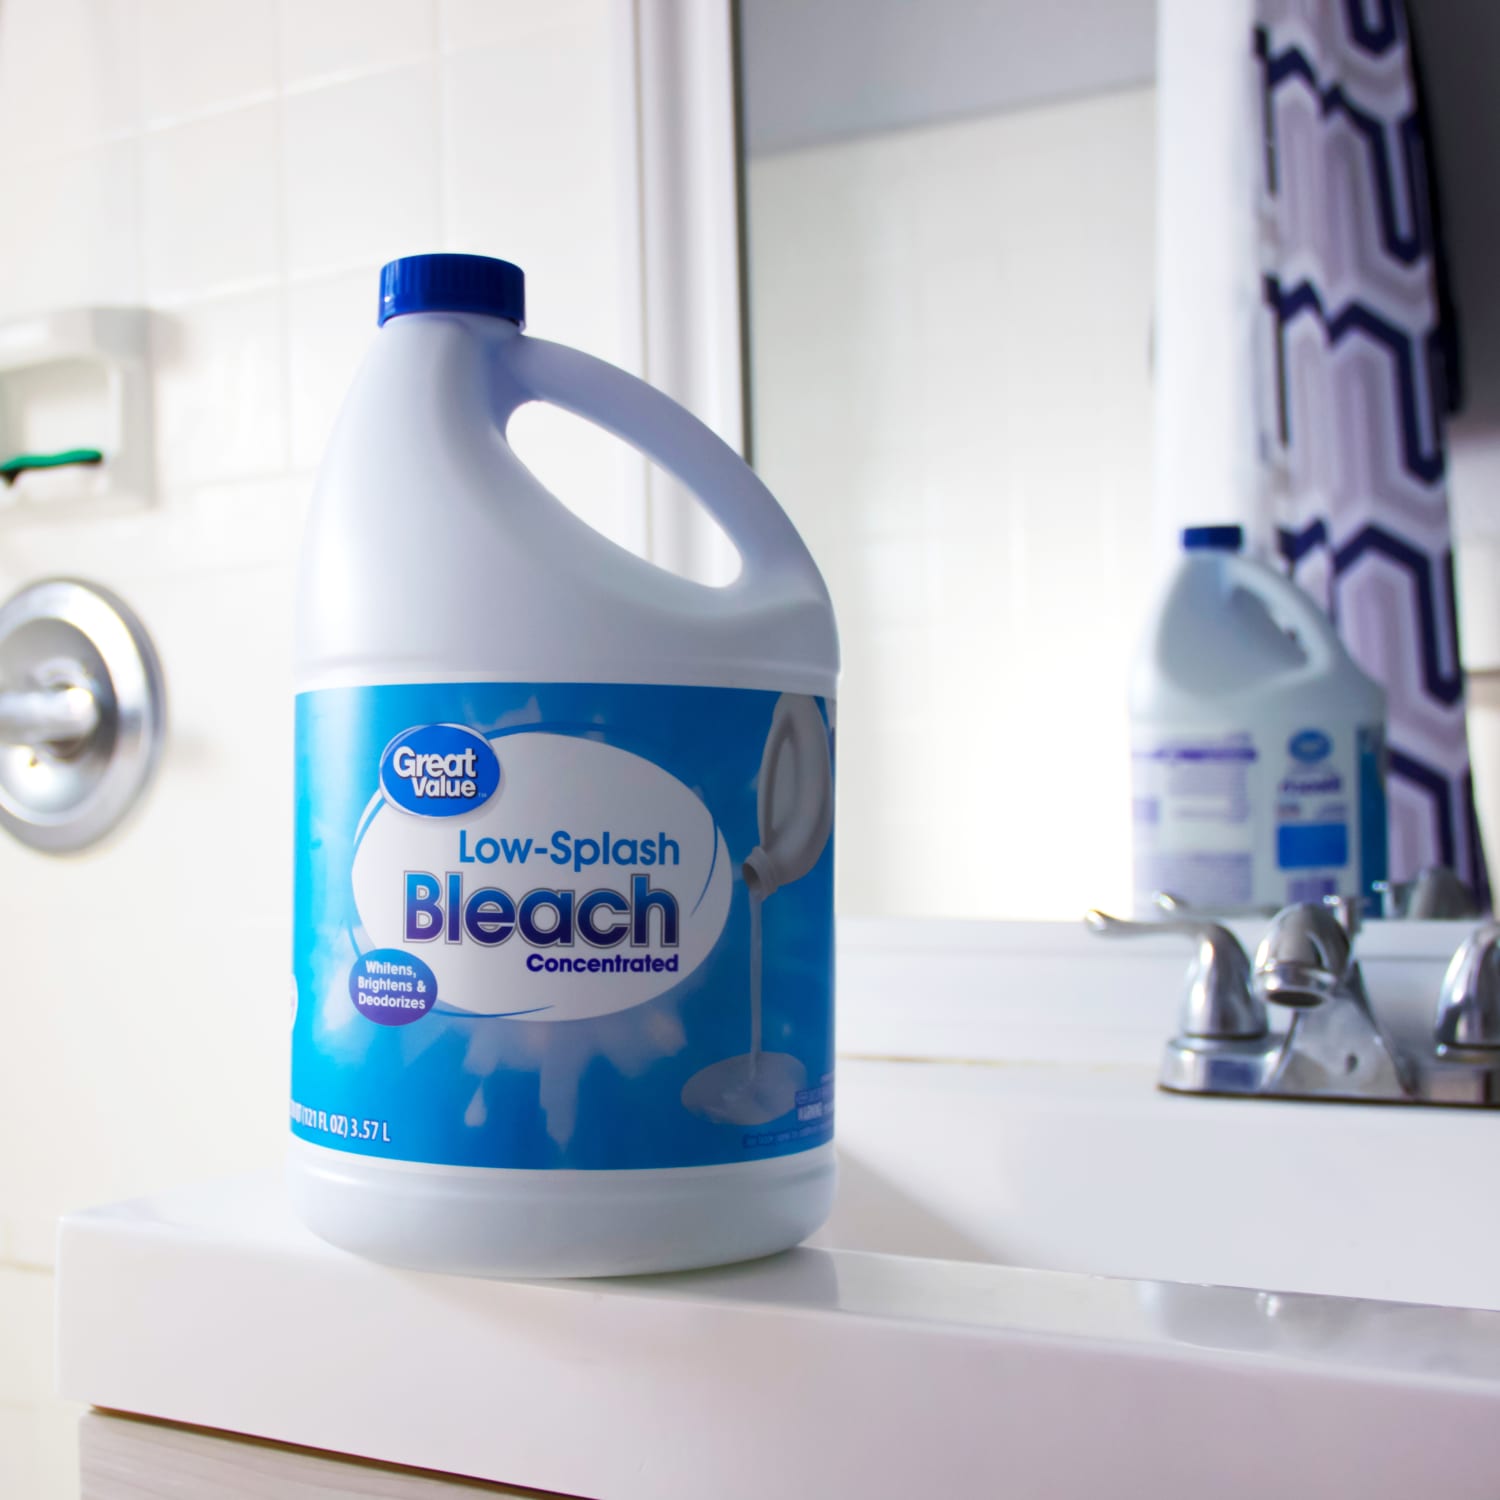 Cleaning and Disinfecting With Bleach